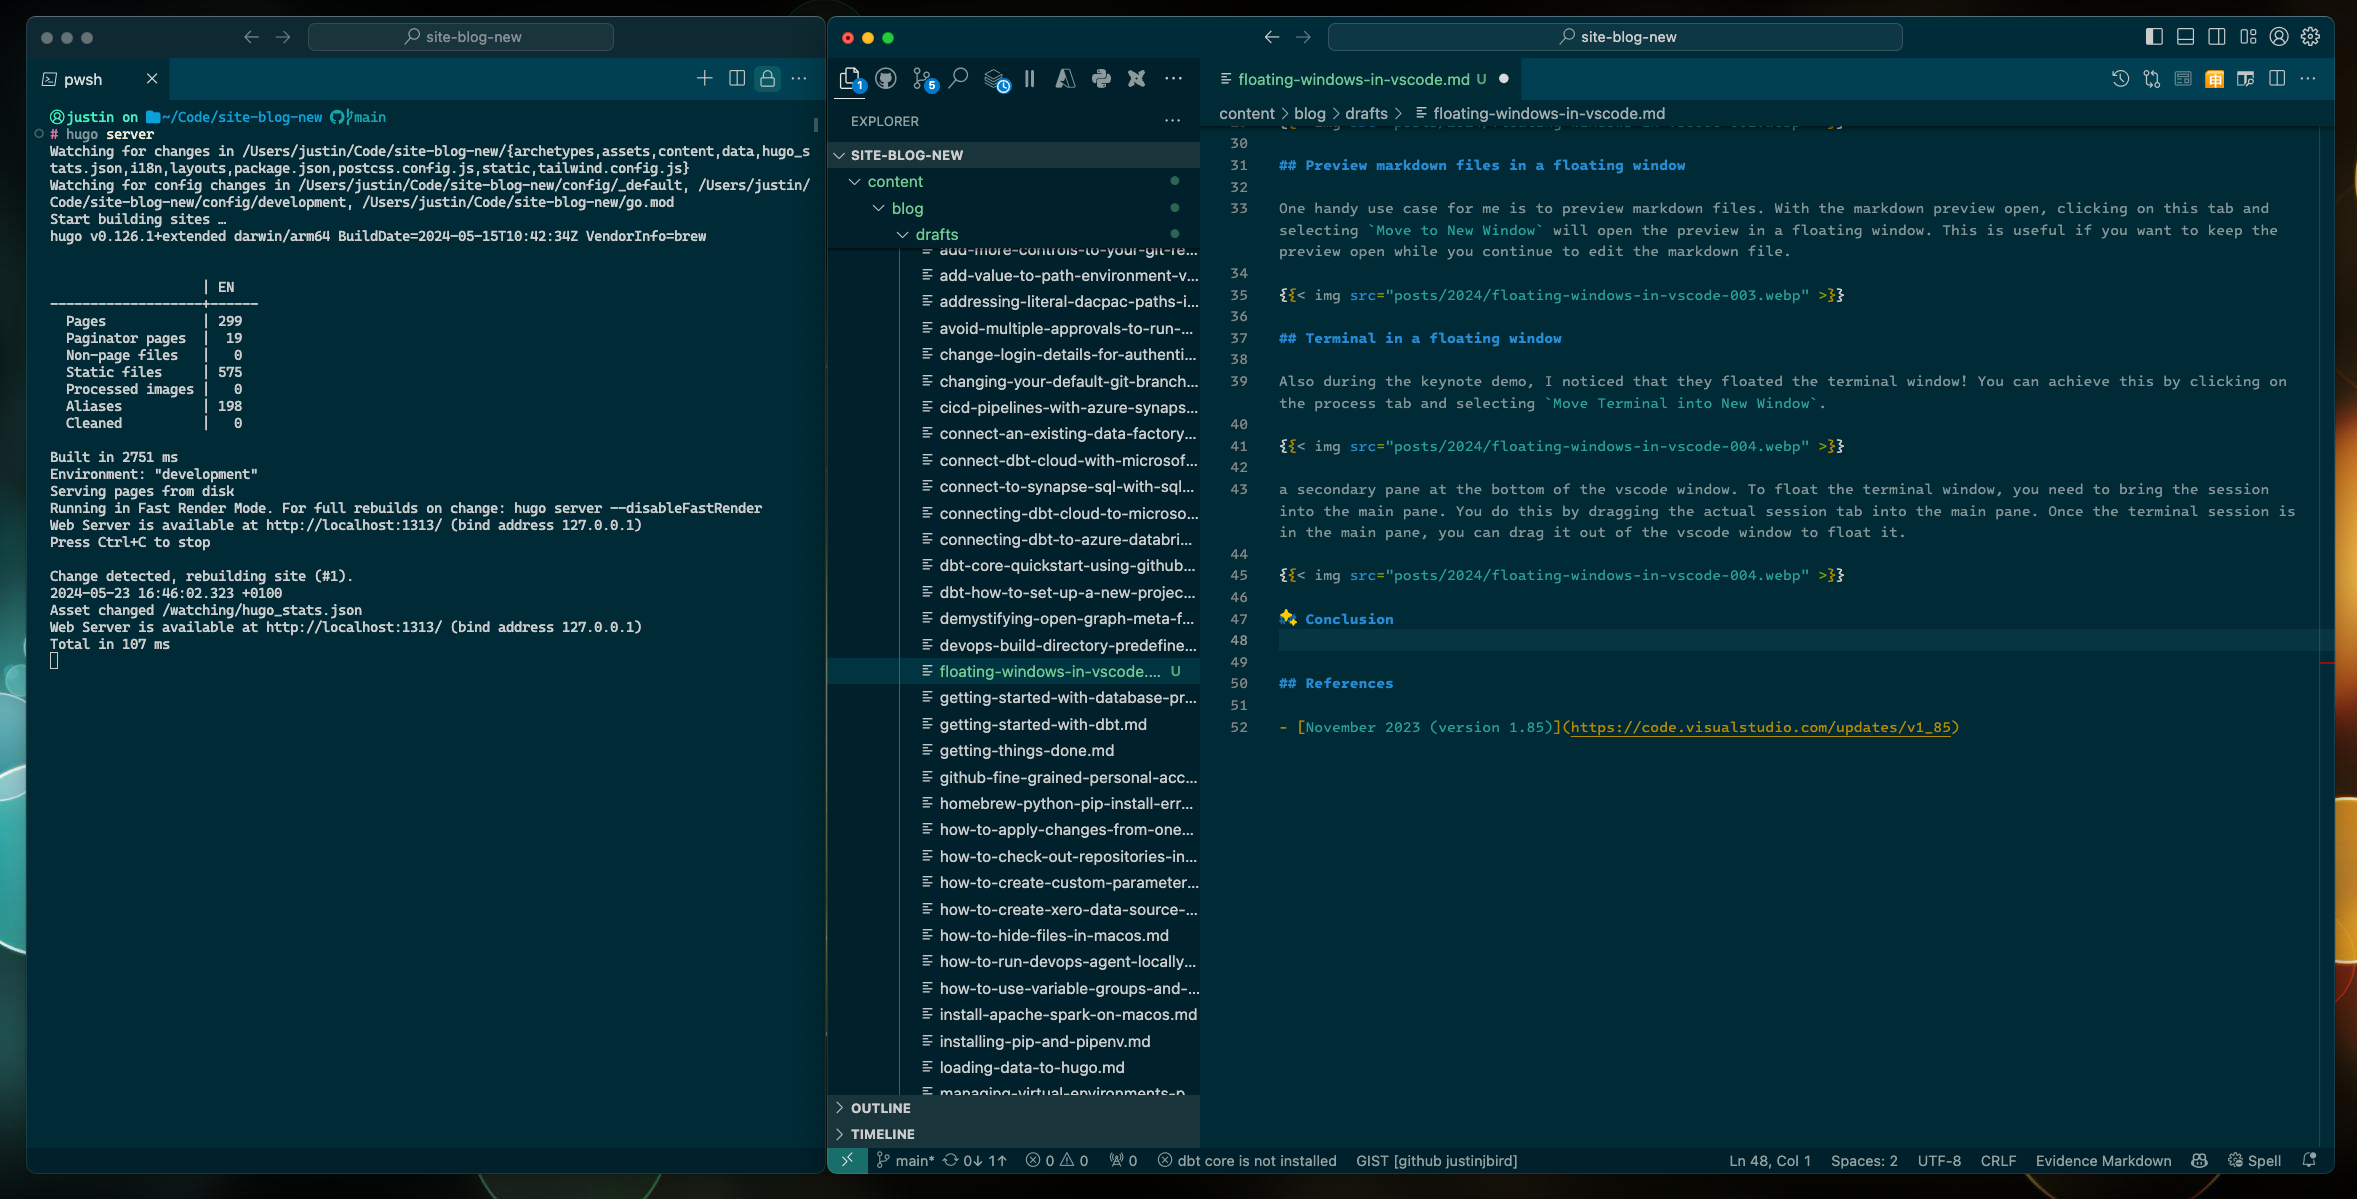 the final screenshot shows terminal displayed as a pinned window alongside vscode